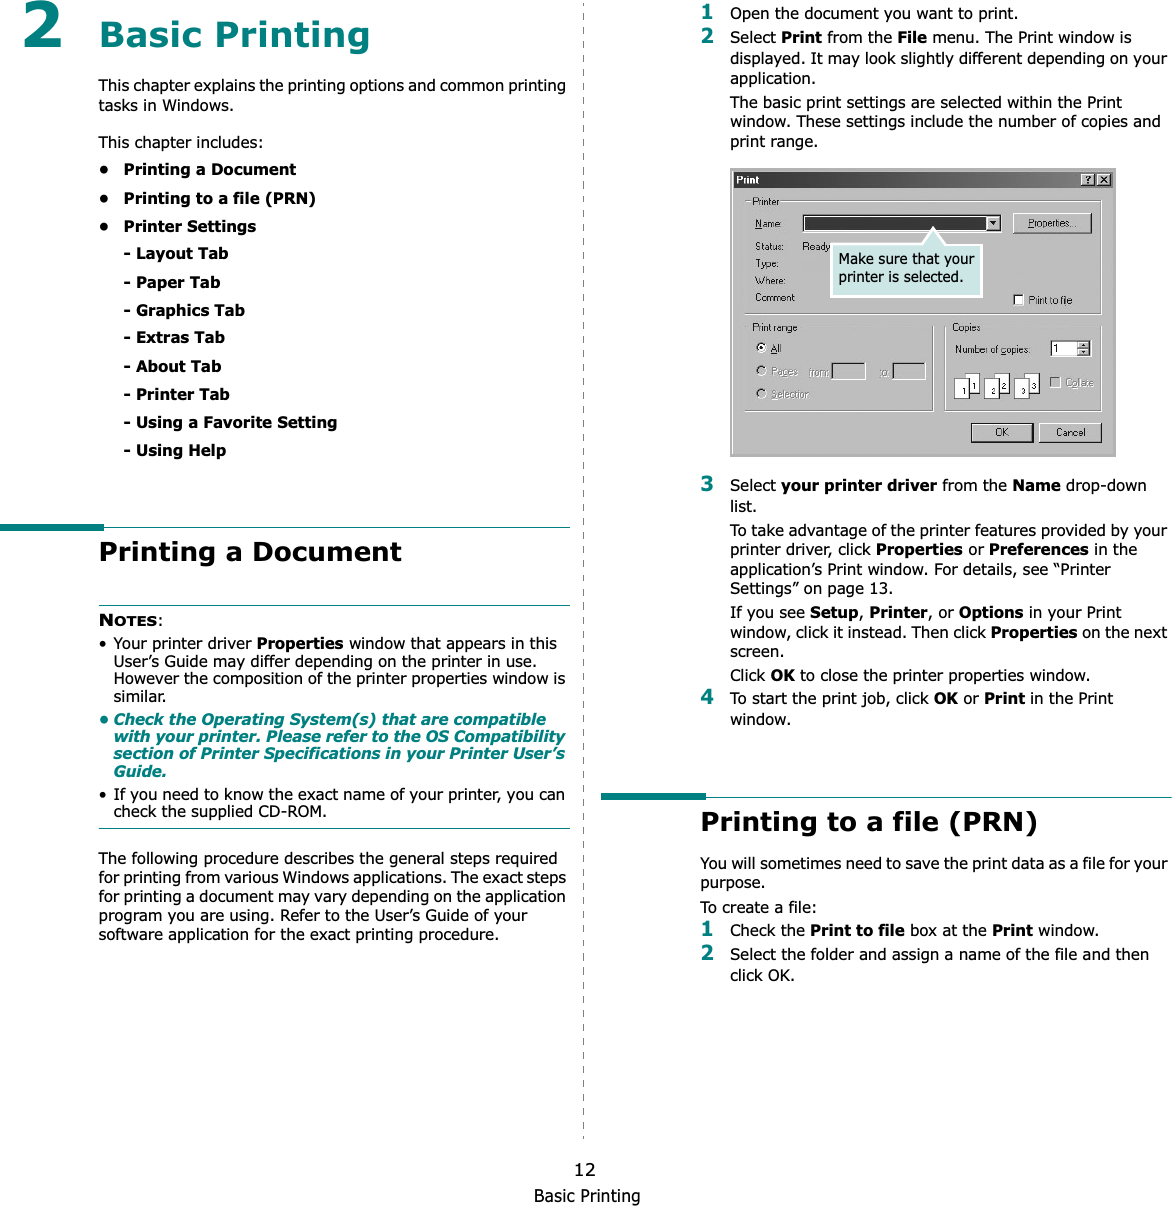 Basic Printing122Basic Printing This chapter explains the printing options and common printing tasks in Windows. This chapter includes:• Printing a Document• Printing to a file (PRN)• Printer Settings- Layout Tab- Paper Tab- Graphics Tab- Extras Tab- About Tab- Printer Tab- Using a Favorite Setting- Using HelpPrinting a DocumentNOTES:• Your printer driver Properties window that appears in this User’s Guide may differ depending on the printer in use. However the composition of the printer properties window is similar.• Check the Operating System(s) that are compatible with your printer. Please refer to the OS Compatibility section of Printer Specifications in your Printer User’s Guide.• If you need to know the exact name of your printer, you can check the supplied CD-ROM.The following procedure describes the general steps required for printing from various Windows applications. The exact steps for printing a document may vary depending on the application program you are using. Refer to the User’s Guide of your software application for the exact printing procedure.1Open the document you want to print.2Select Print from the File menu. The Print window is displayed. It may look slightly different depending on your application. The basic print settings are selected within the Print window. These settings include the number of copies and print range.3Select your printer driver from the Name drop-down list.To take advantage of the printer features provided by your printer driver, click Properties or Preferences in the application’s Print window. For details, see “Printer Settings” on page 13.If you see Setup,Printer, or Options in your Print window, click it instead. Then click Properties on the next screen.Click OK to close the printer properties window.4To start the print job, click OK or Print in the Print window.Printing to a file (PRN)  You will sometimes need to save the print data as a file for your purpose. To create a file:1Check the Print to file box at the Print window.2Select the folder and assign a name of the file and then click OK.Make sure that your printer is selected.